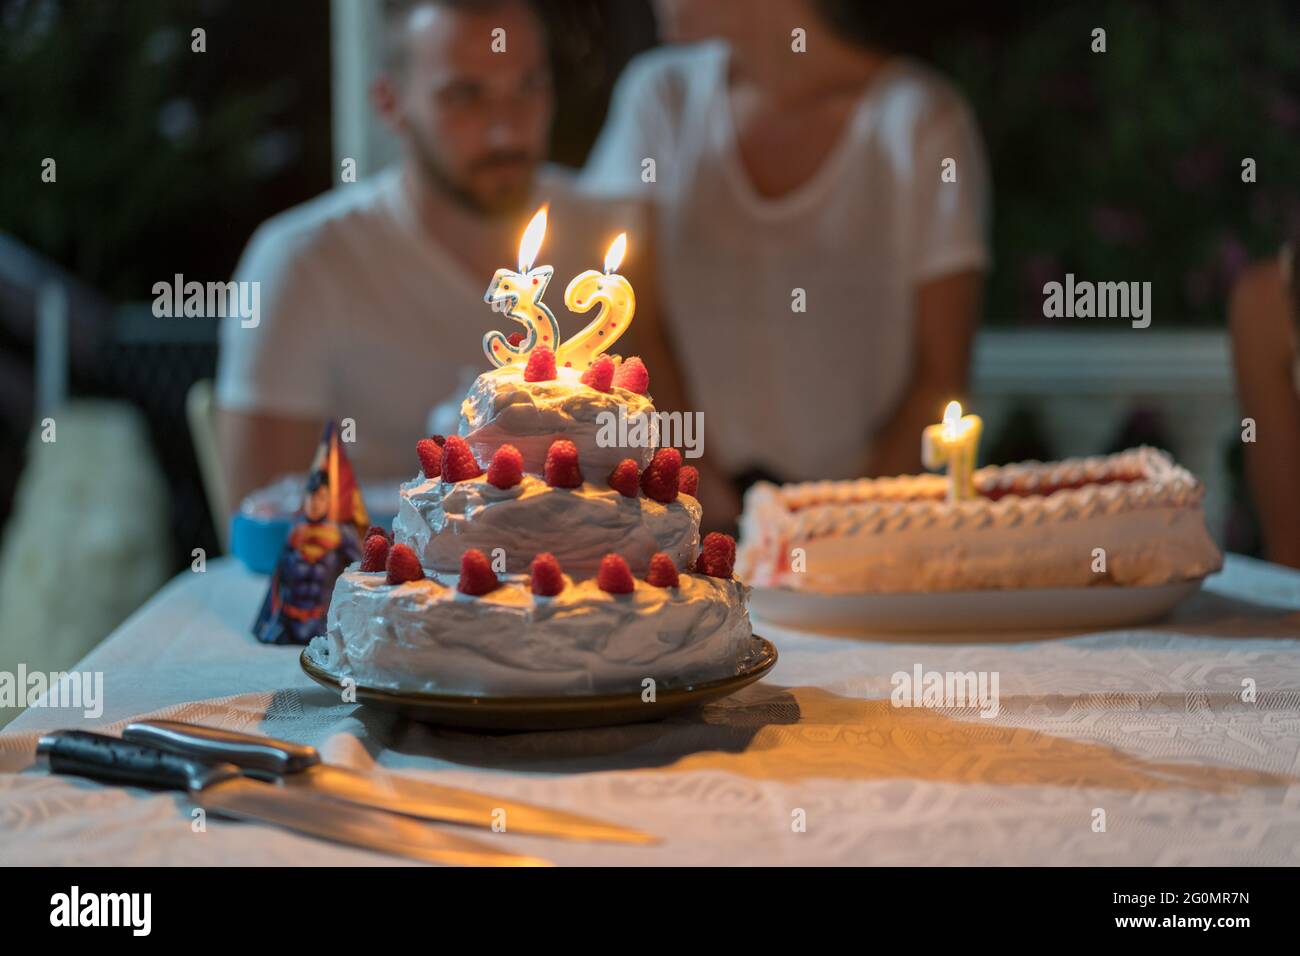 Guy celebrating his 32nd birthday. Cake with strawberries and fruit. Knives and party hats on the table Stock Photo